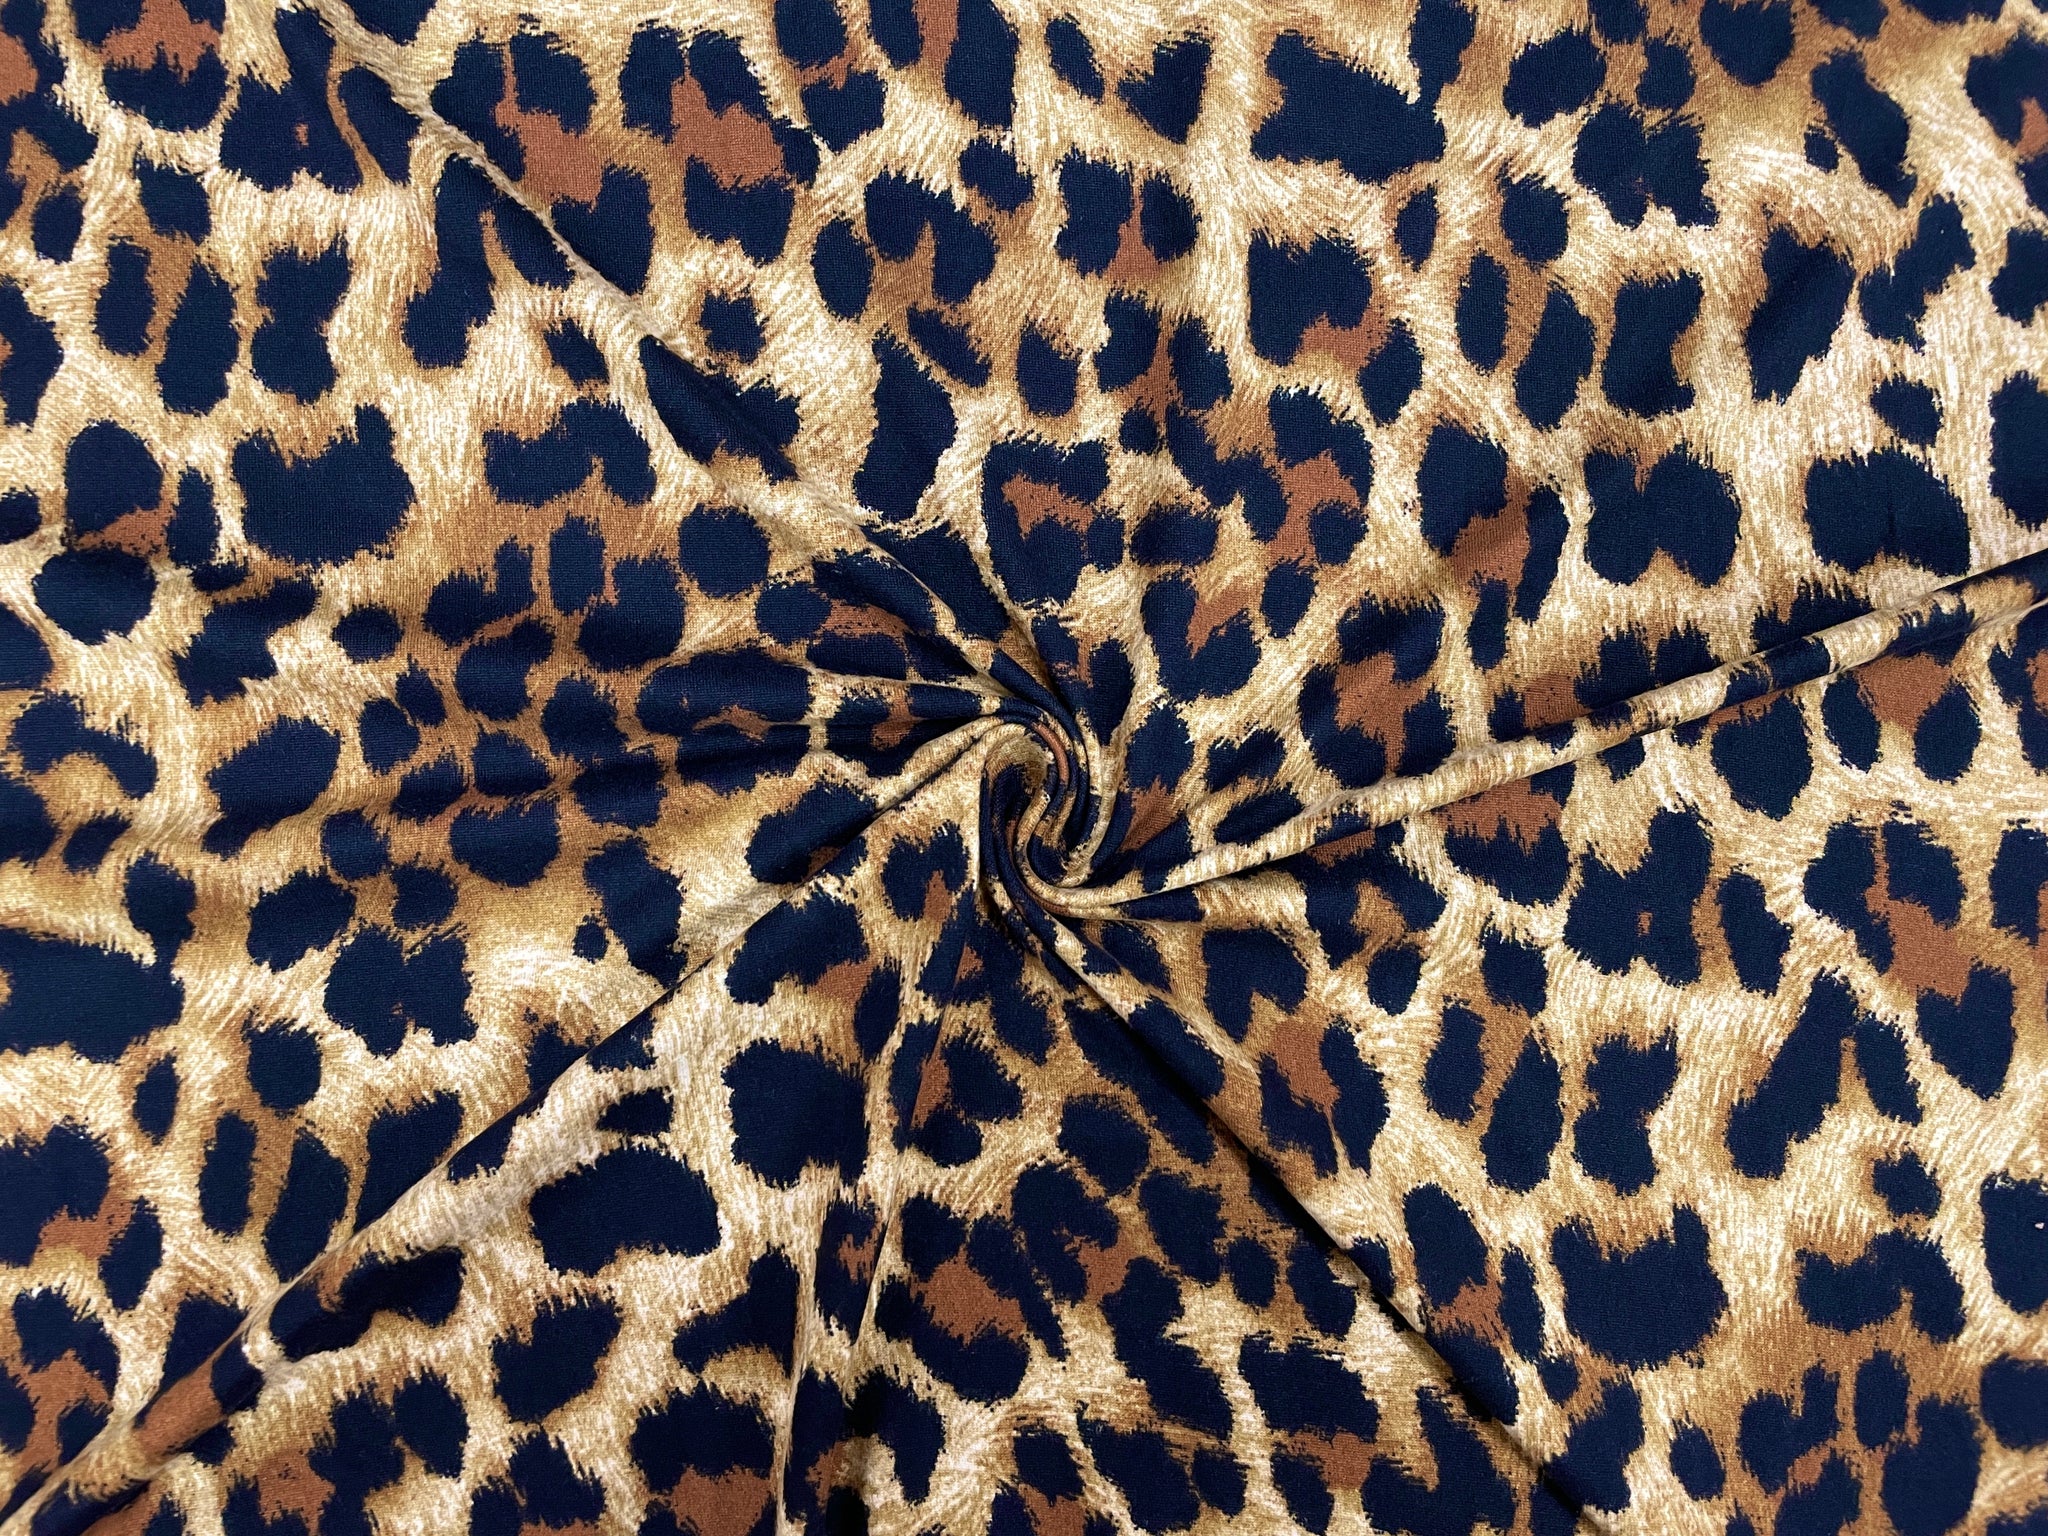 Animal print with lycra Fabric 58 wide available in two color